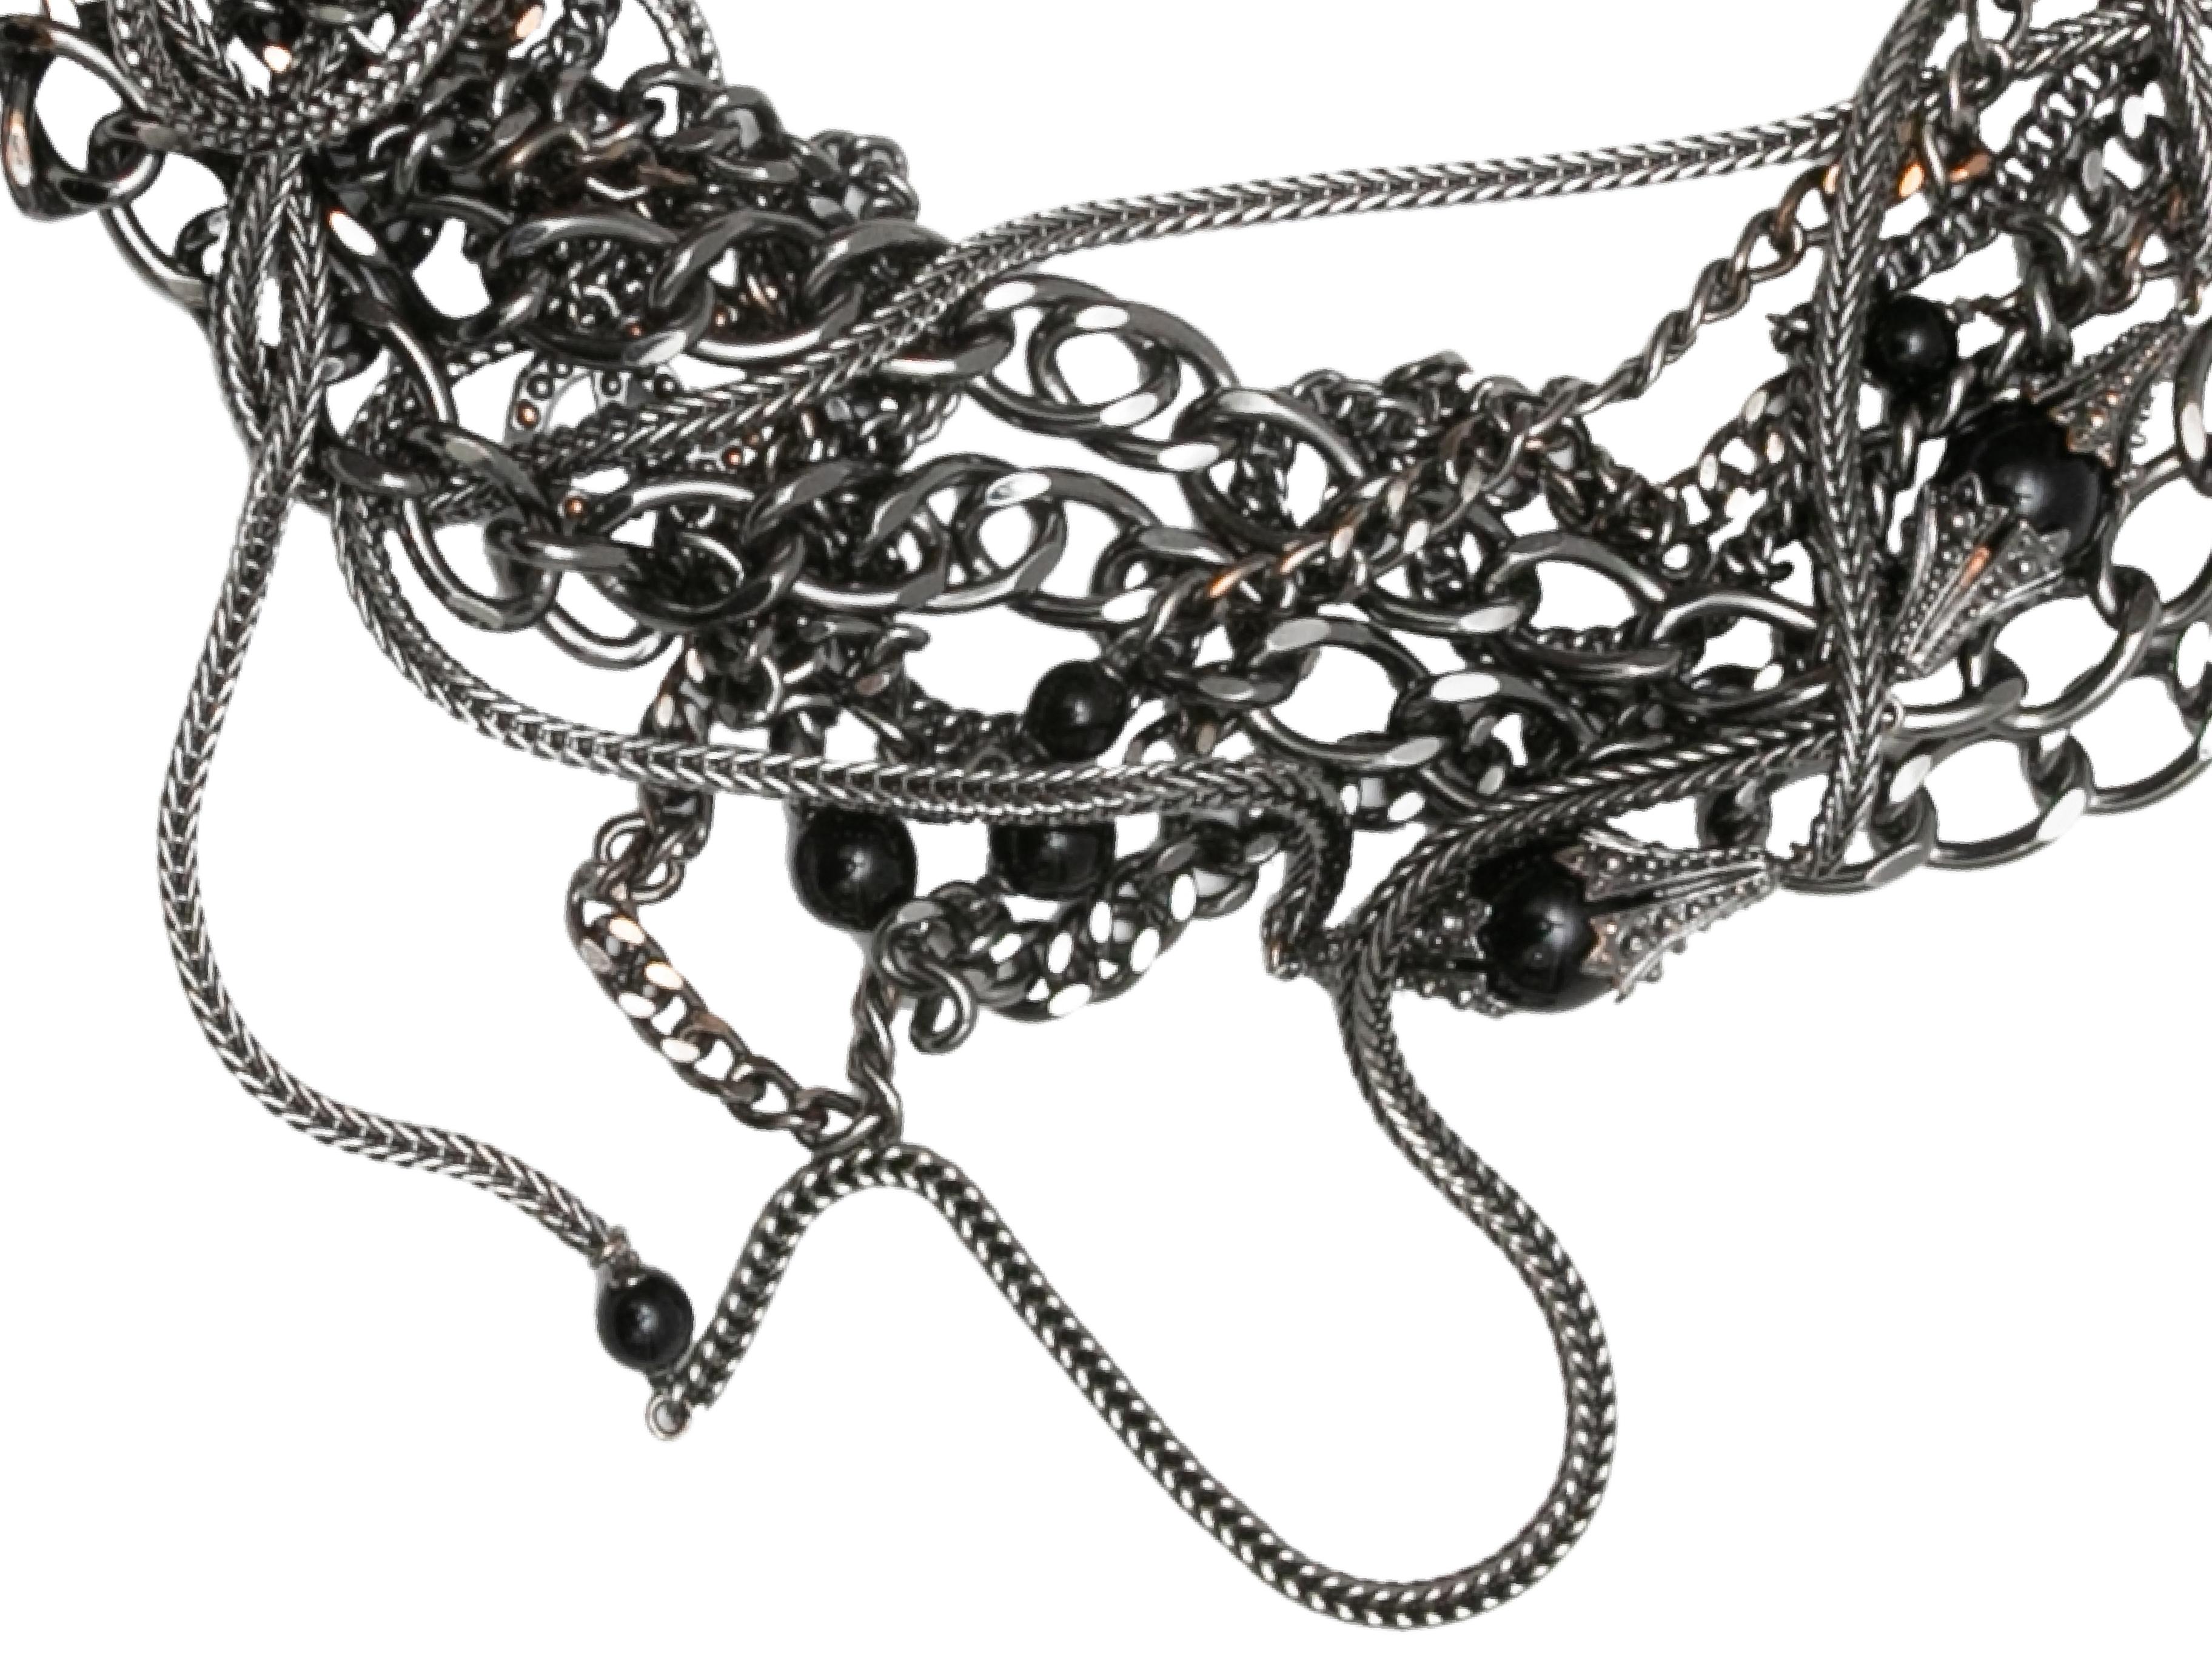 Silver-tone multistrand chain-link and black bead belt by Chanel. Lobster claw clasp closure. 5.5